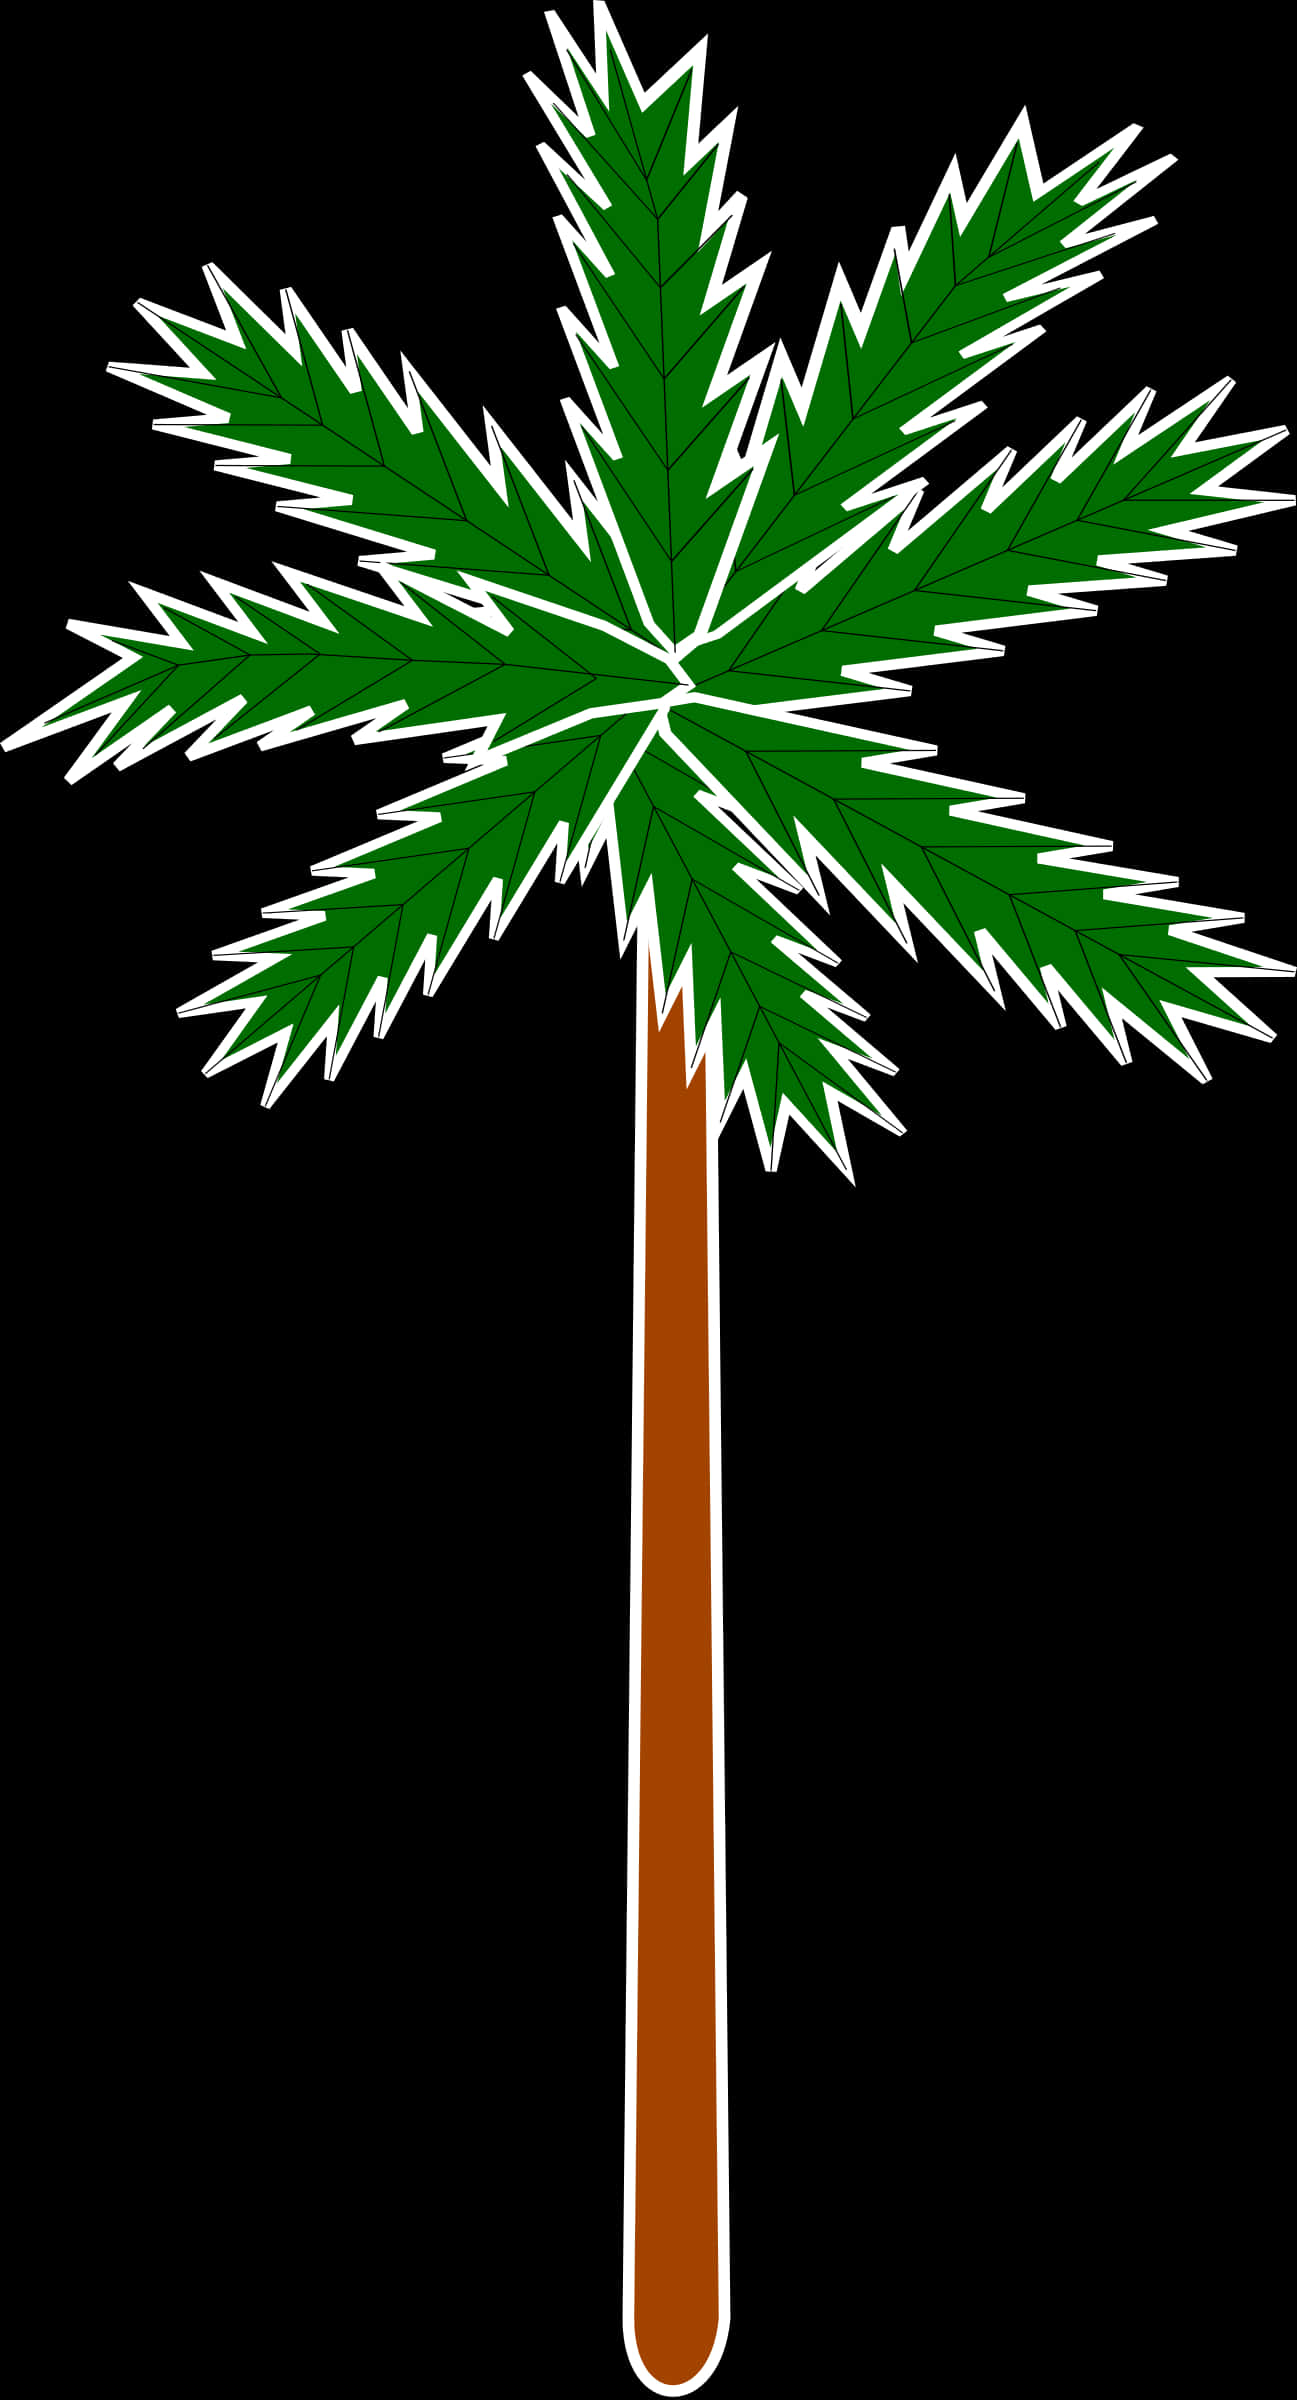 Stylized Palm Tree Graphic PNG